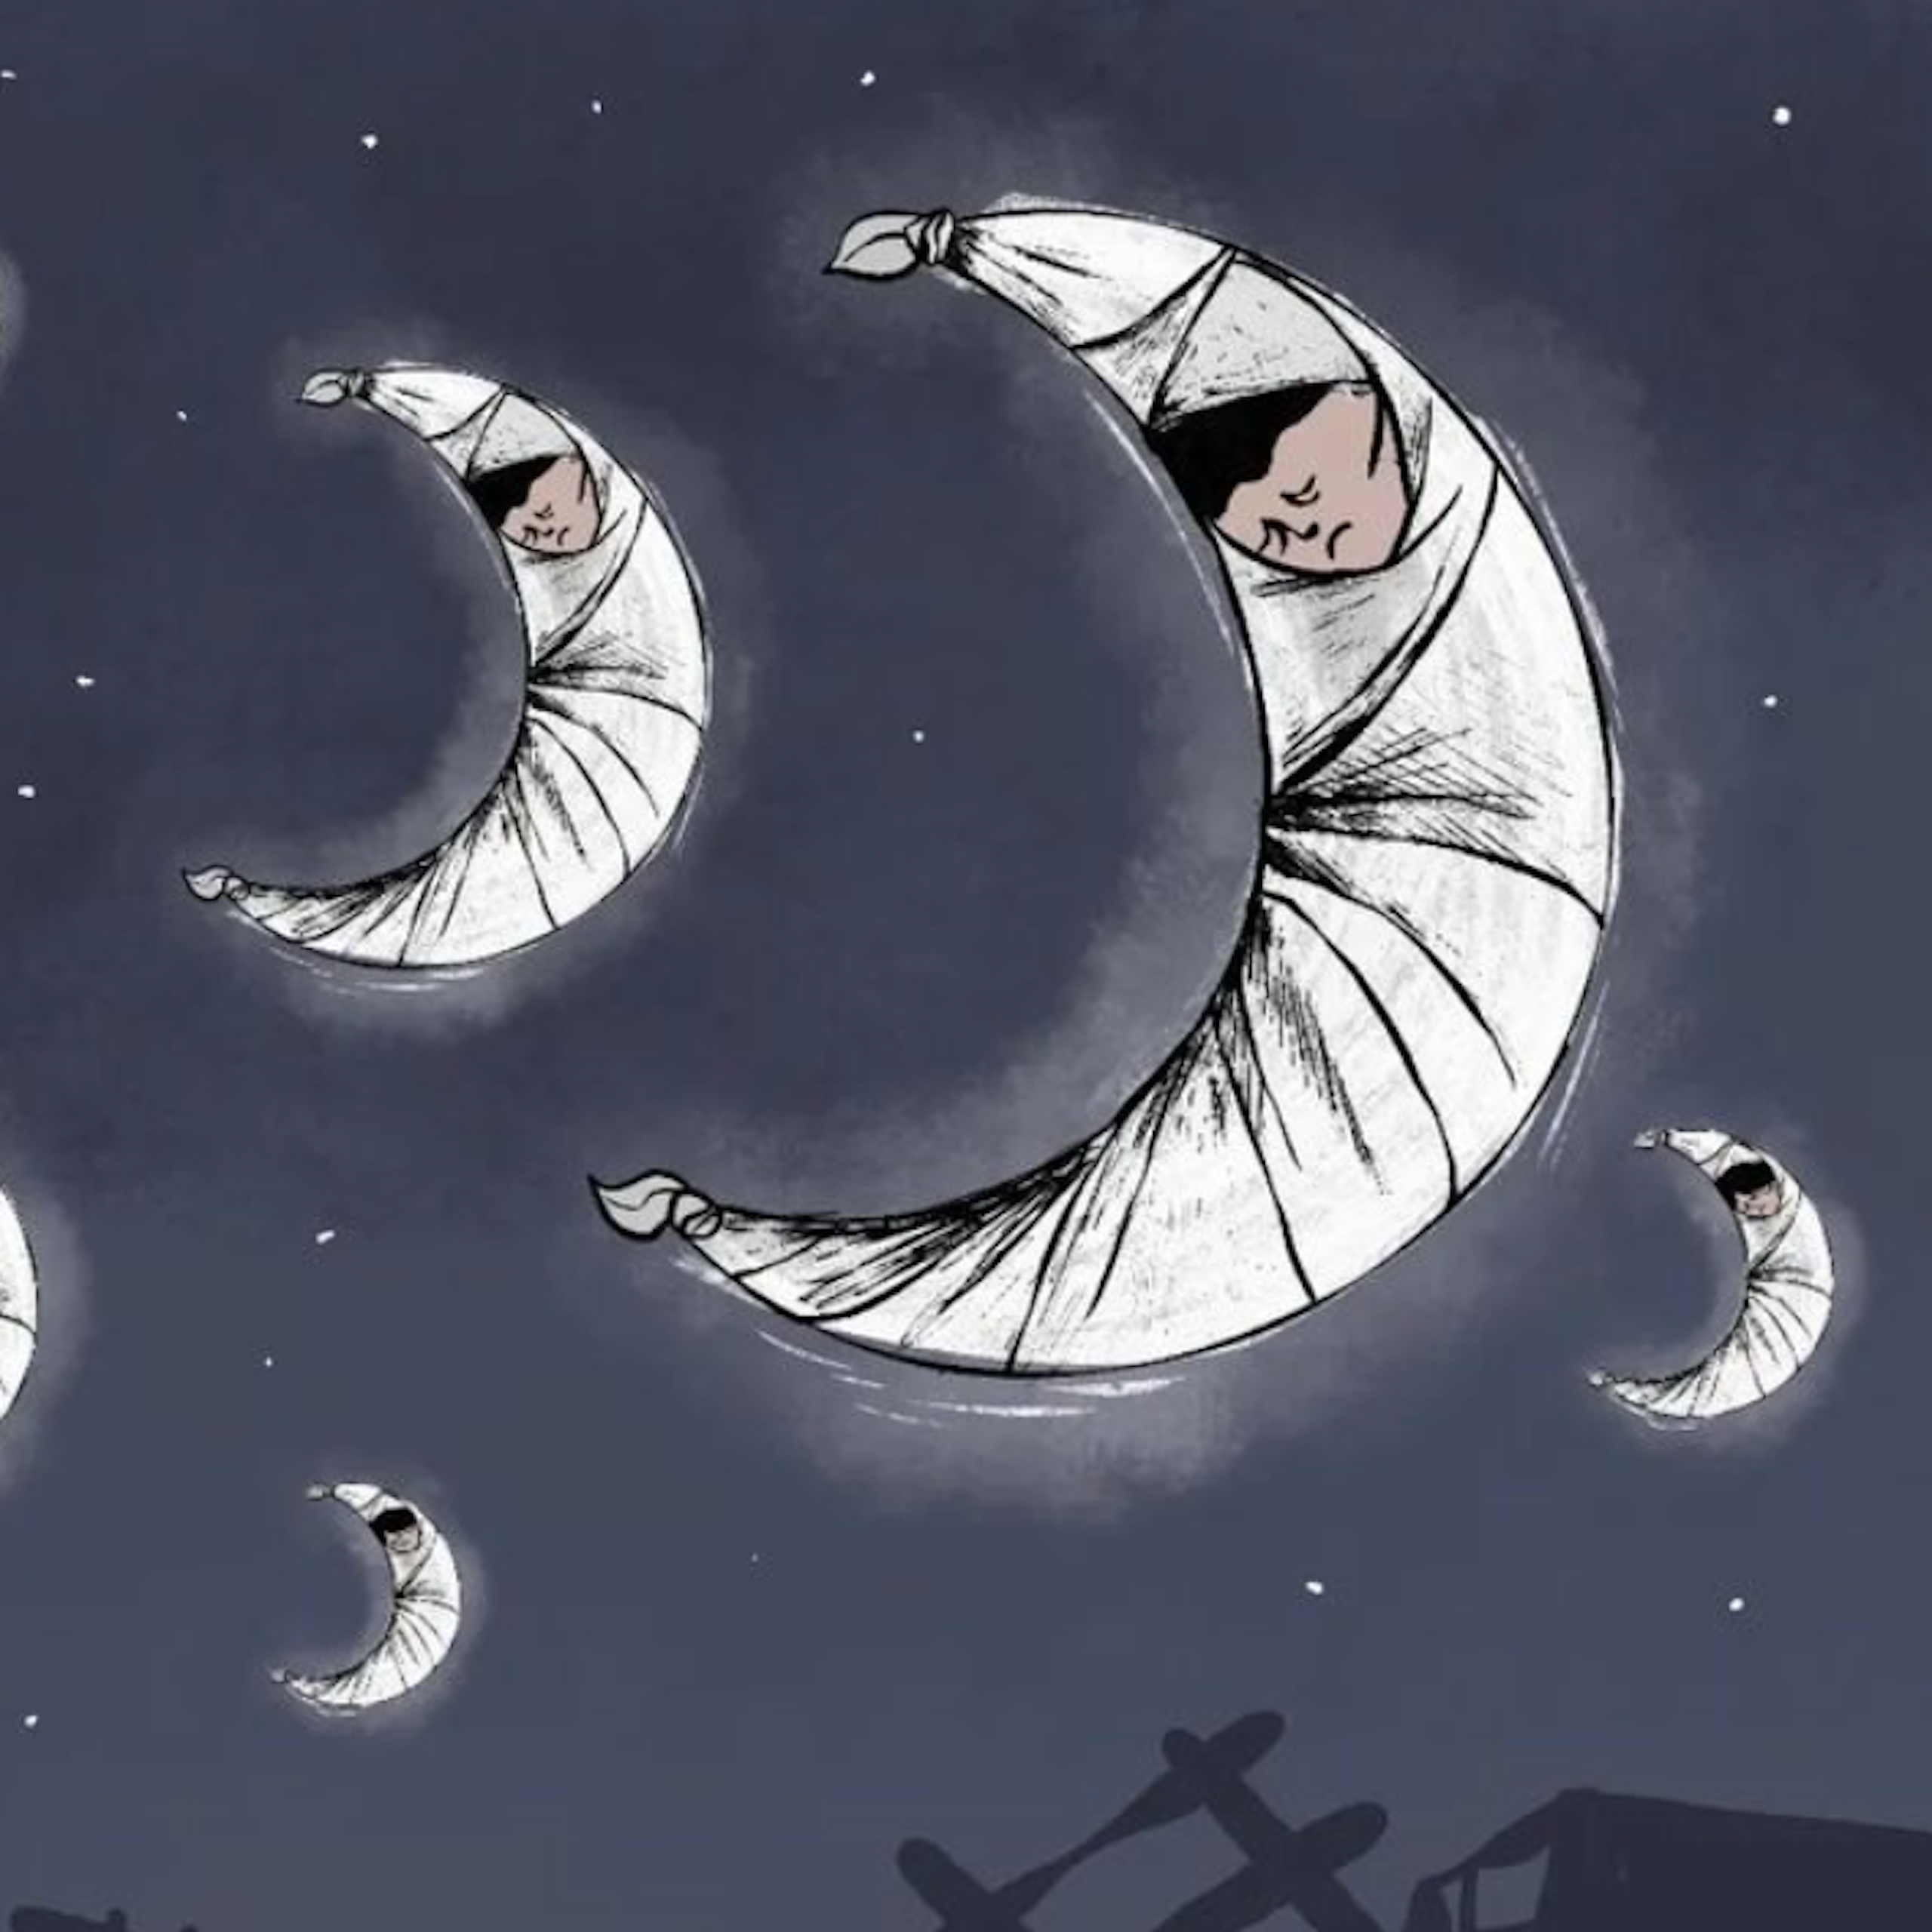 A group of crescent moons against a dark night sky. Each of the moon's has the face of a murdered Palestinian, and the moons appears to be wrapped in white cloth. The ruins of Gaza are spread on the ground below.